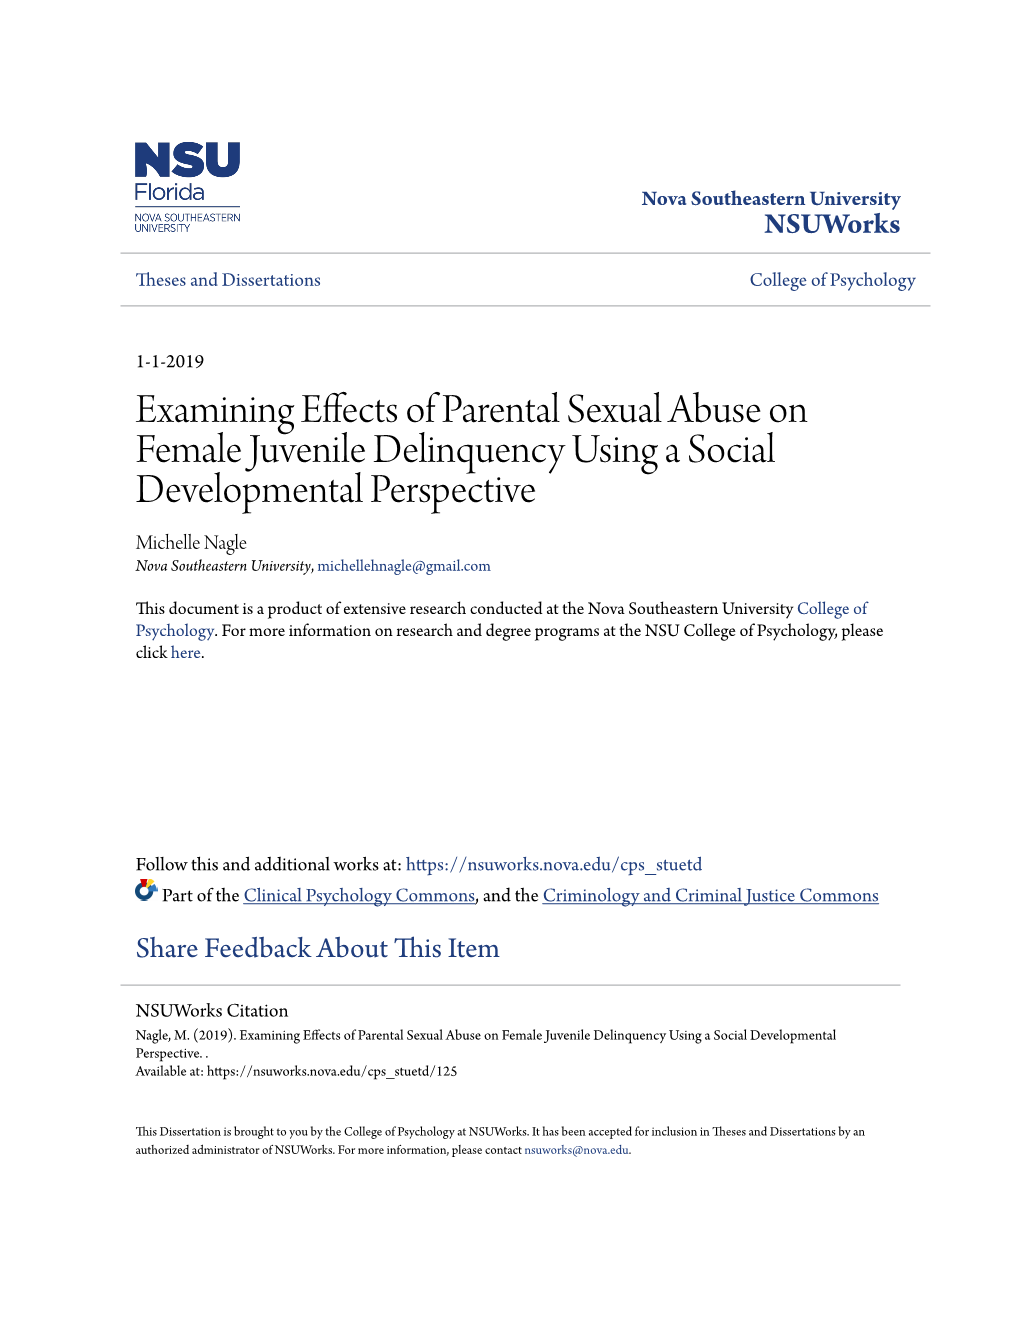 Examining Effects of Parental Sexual Abuse on Female Juvenile Delinquency Using a Social Developmental Perspective